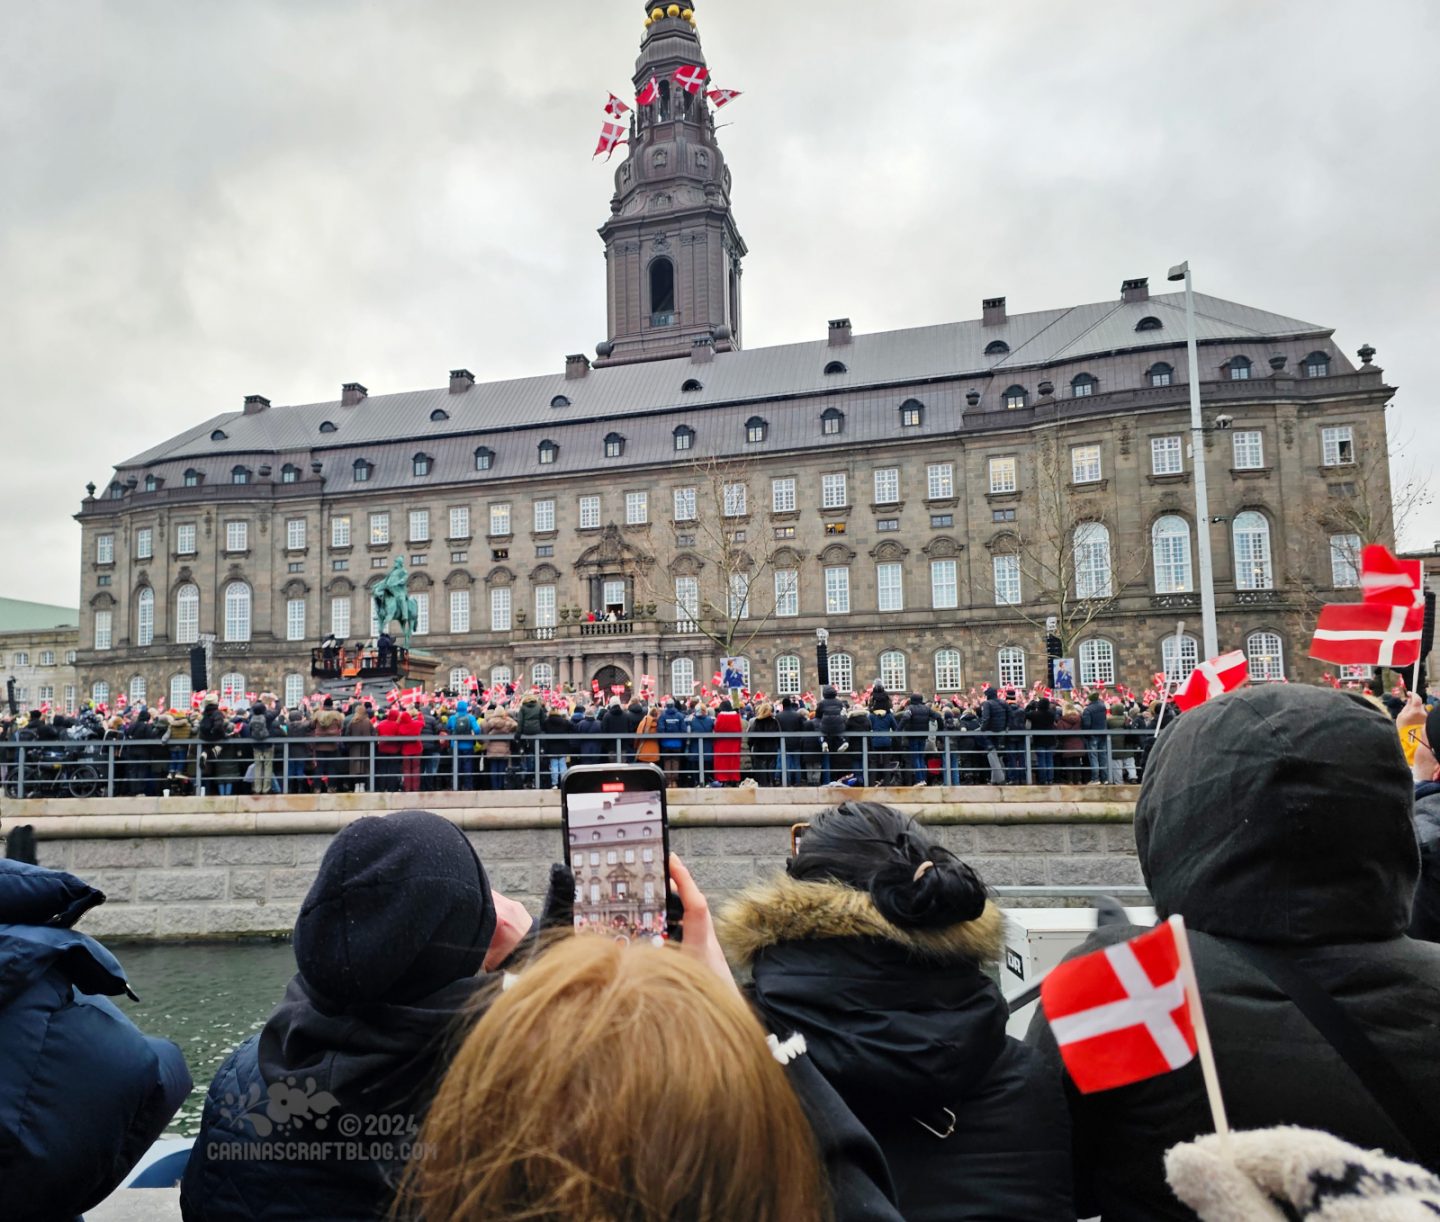 View of the Danish parliament building, Christiansborg. In front of the building, and in the foreground of the picture, are lots of people waving the red and white Danish flag.